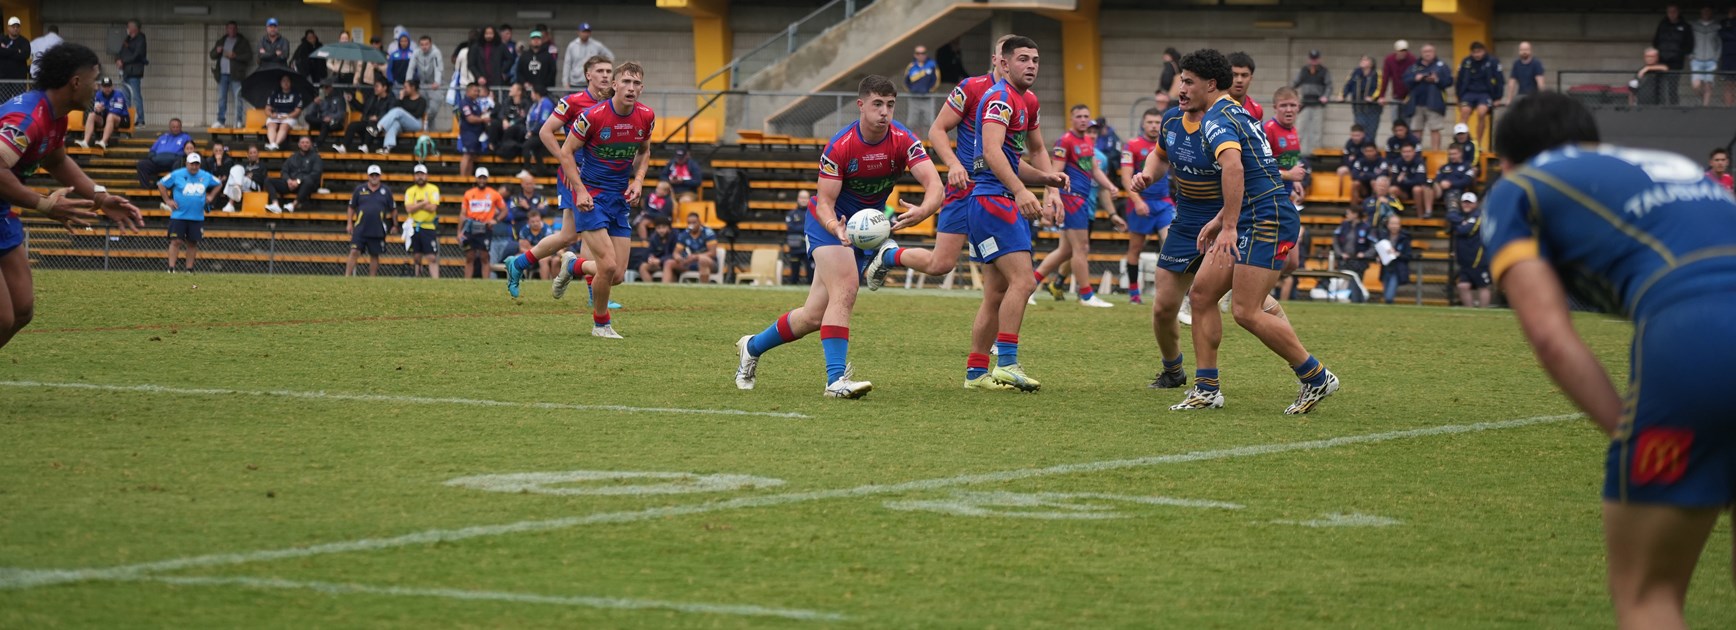 Pathways Report: Junior sides defeated on Grand Final day